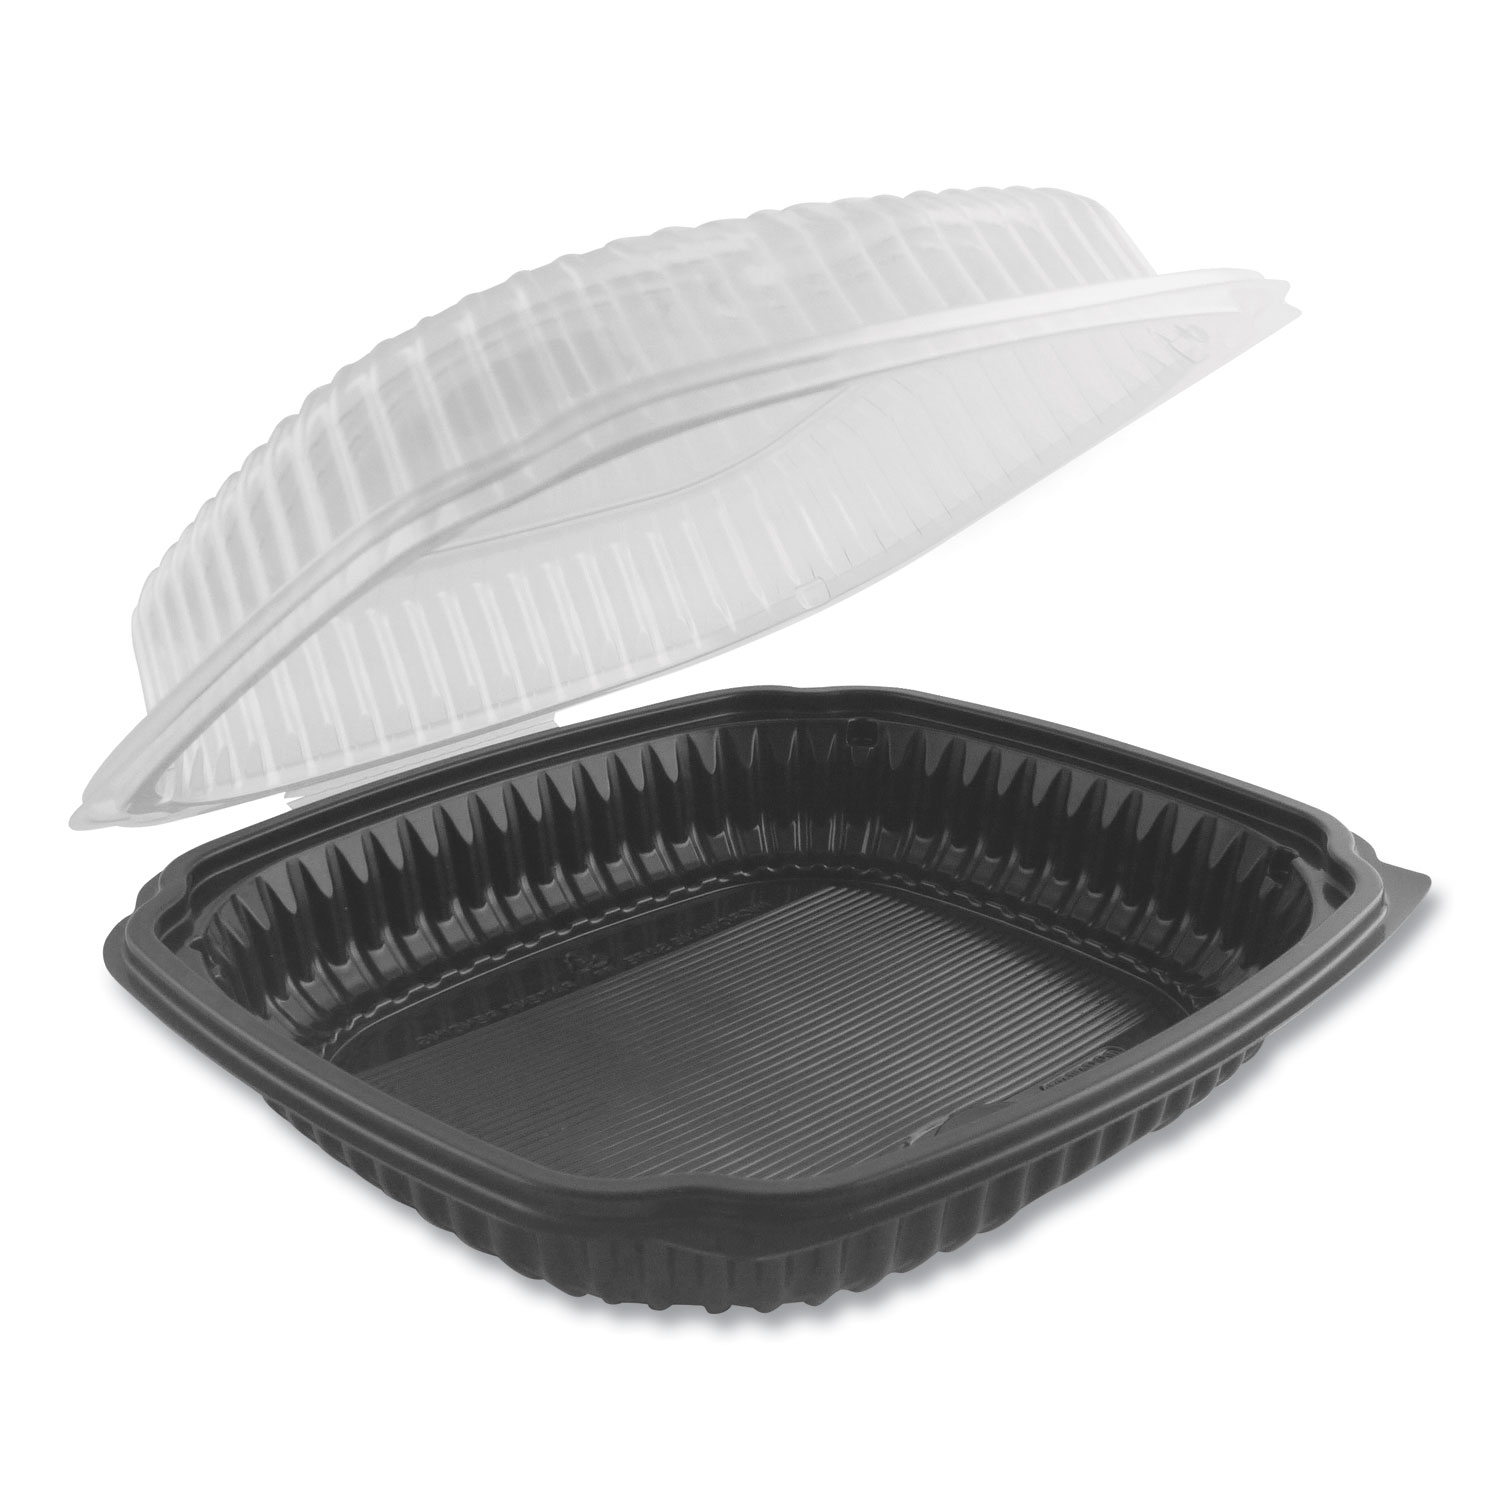  Anchor Packaging 4699610 Culinary Lites Microwavable Container, 47.5 oz, 10.56 x 9.98 x 3.18, Clear/Black, 100/Carton (ANZ4699610) 